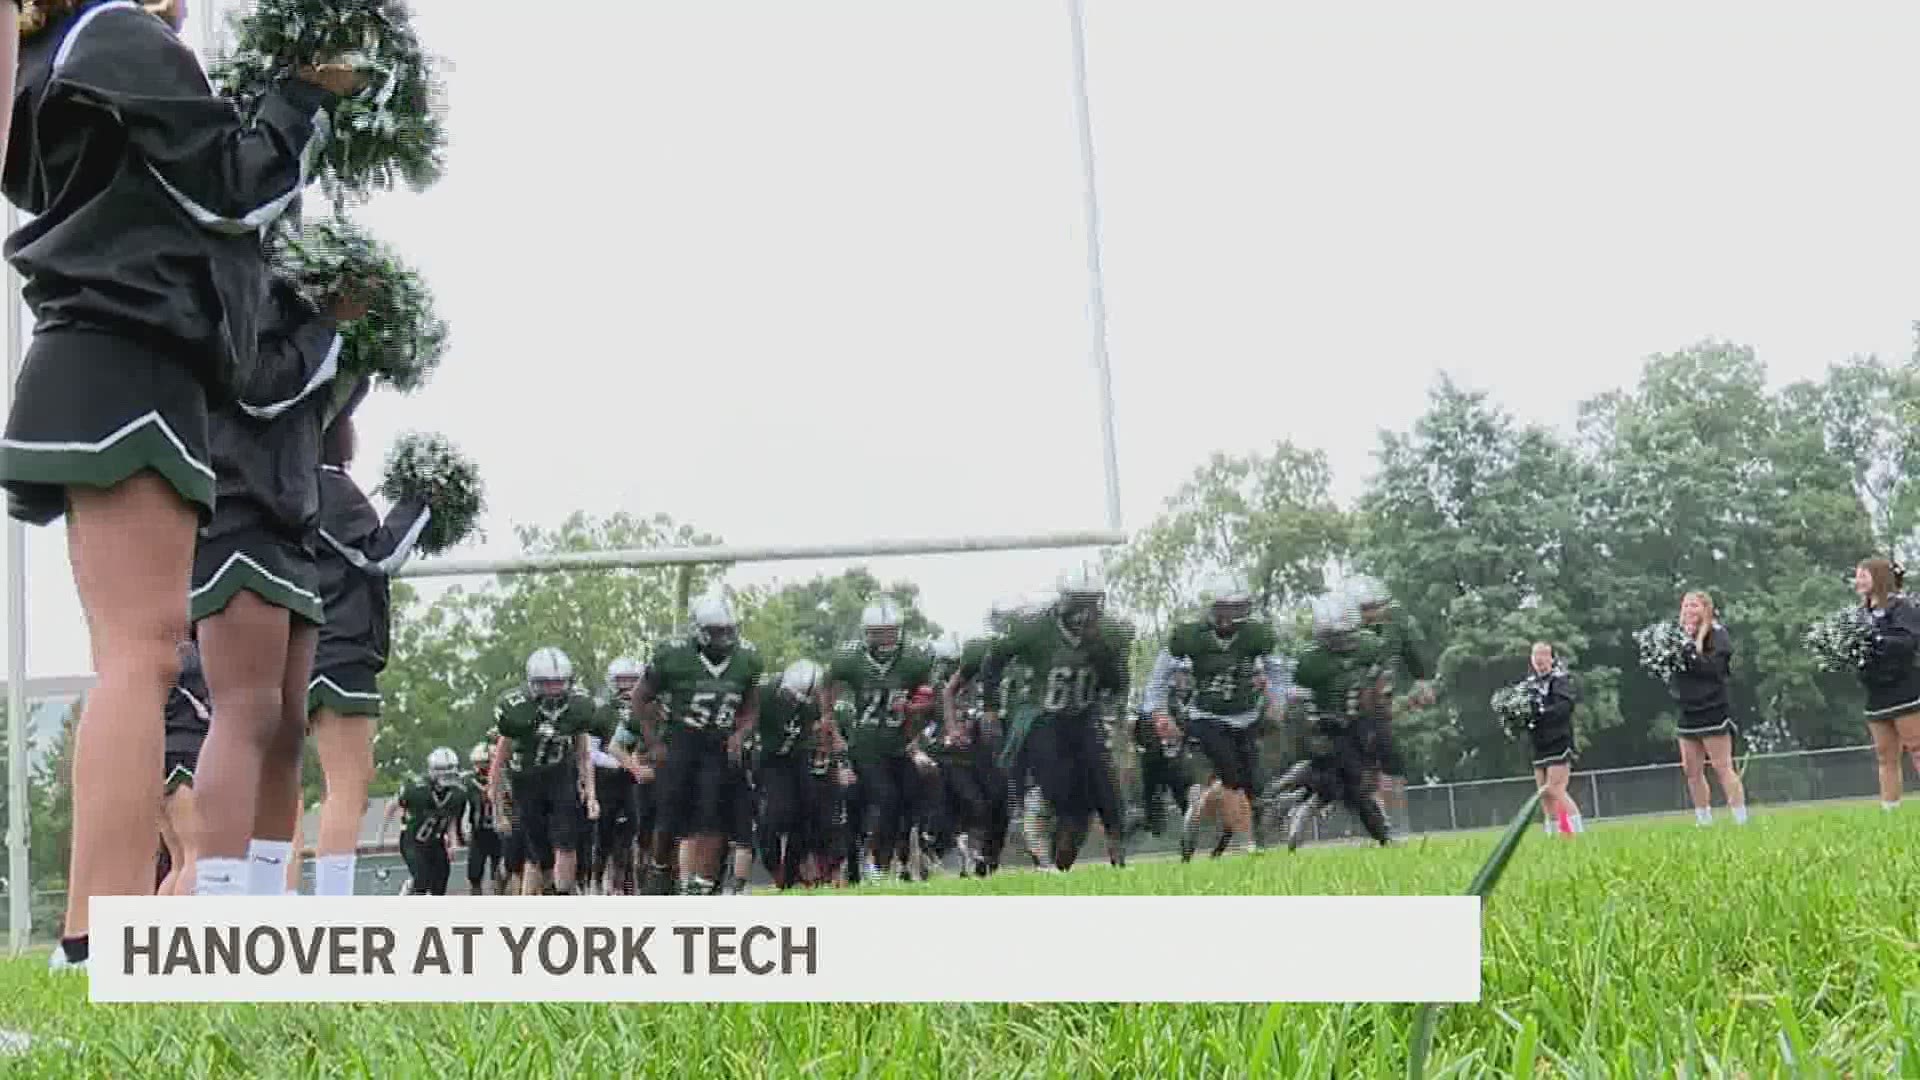 York Tech uses strong third quarter to down Hanover